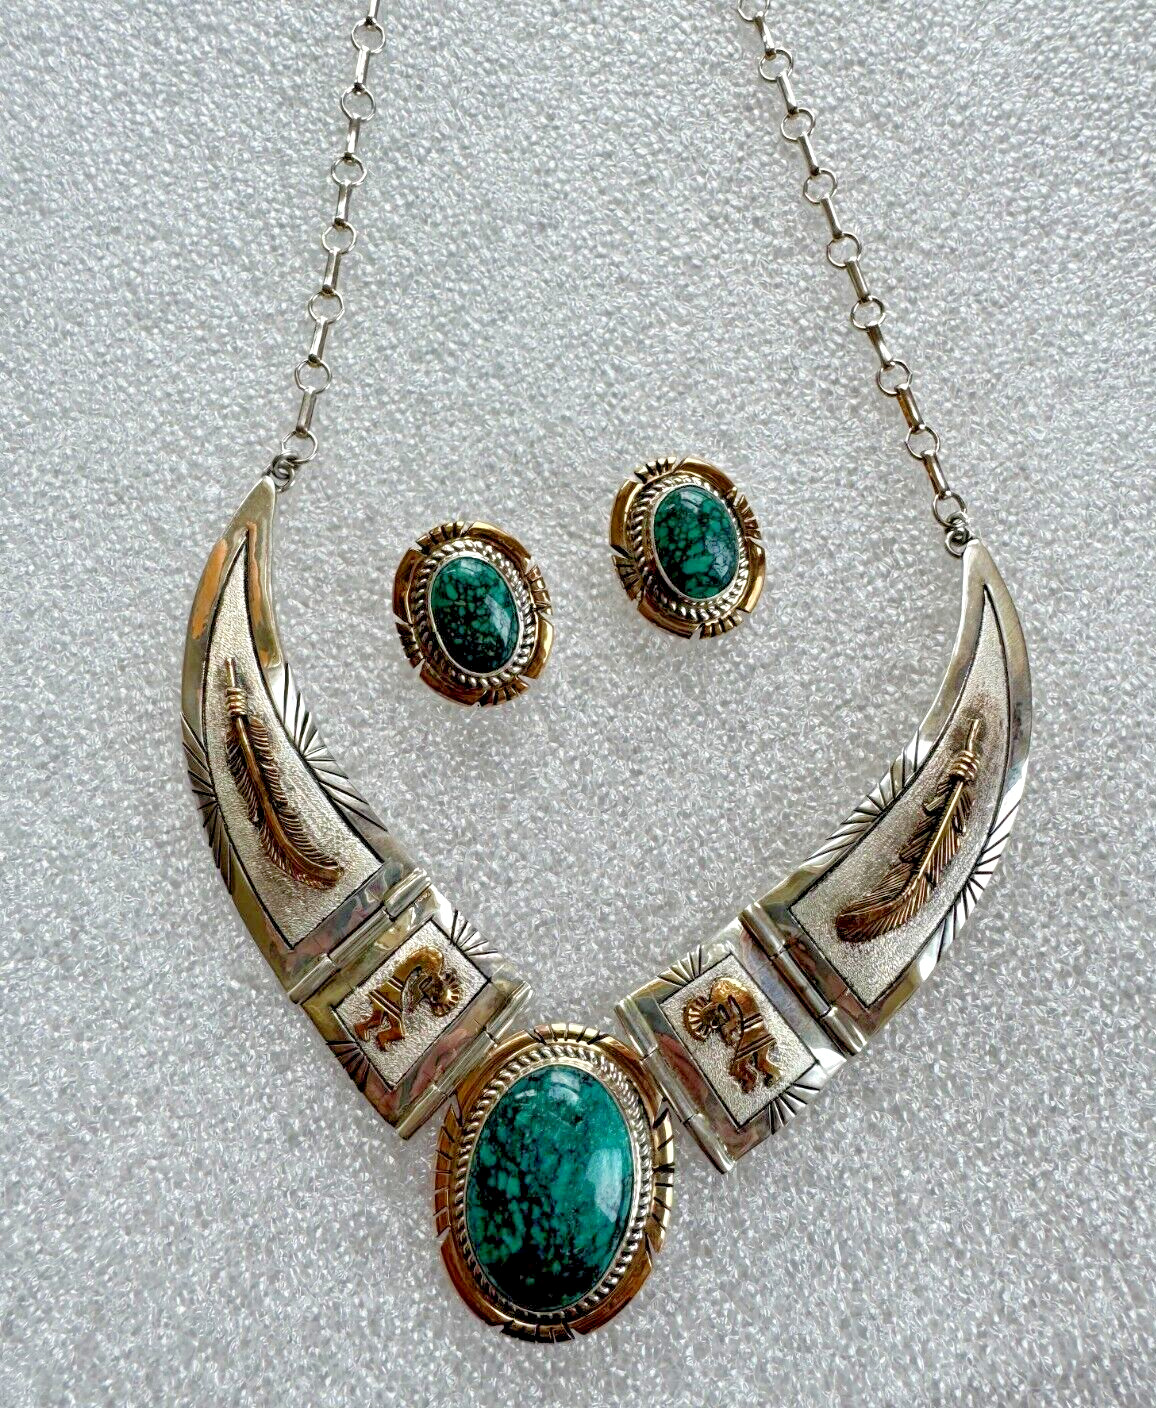 Charles Johnson Navajo Necklace Earrings Sterling Gold Filled Dancers Oval Stone